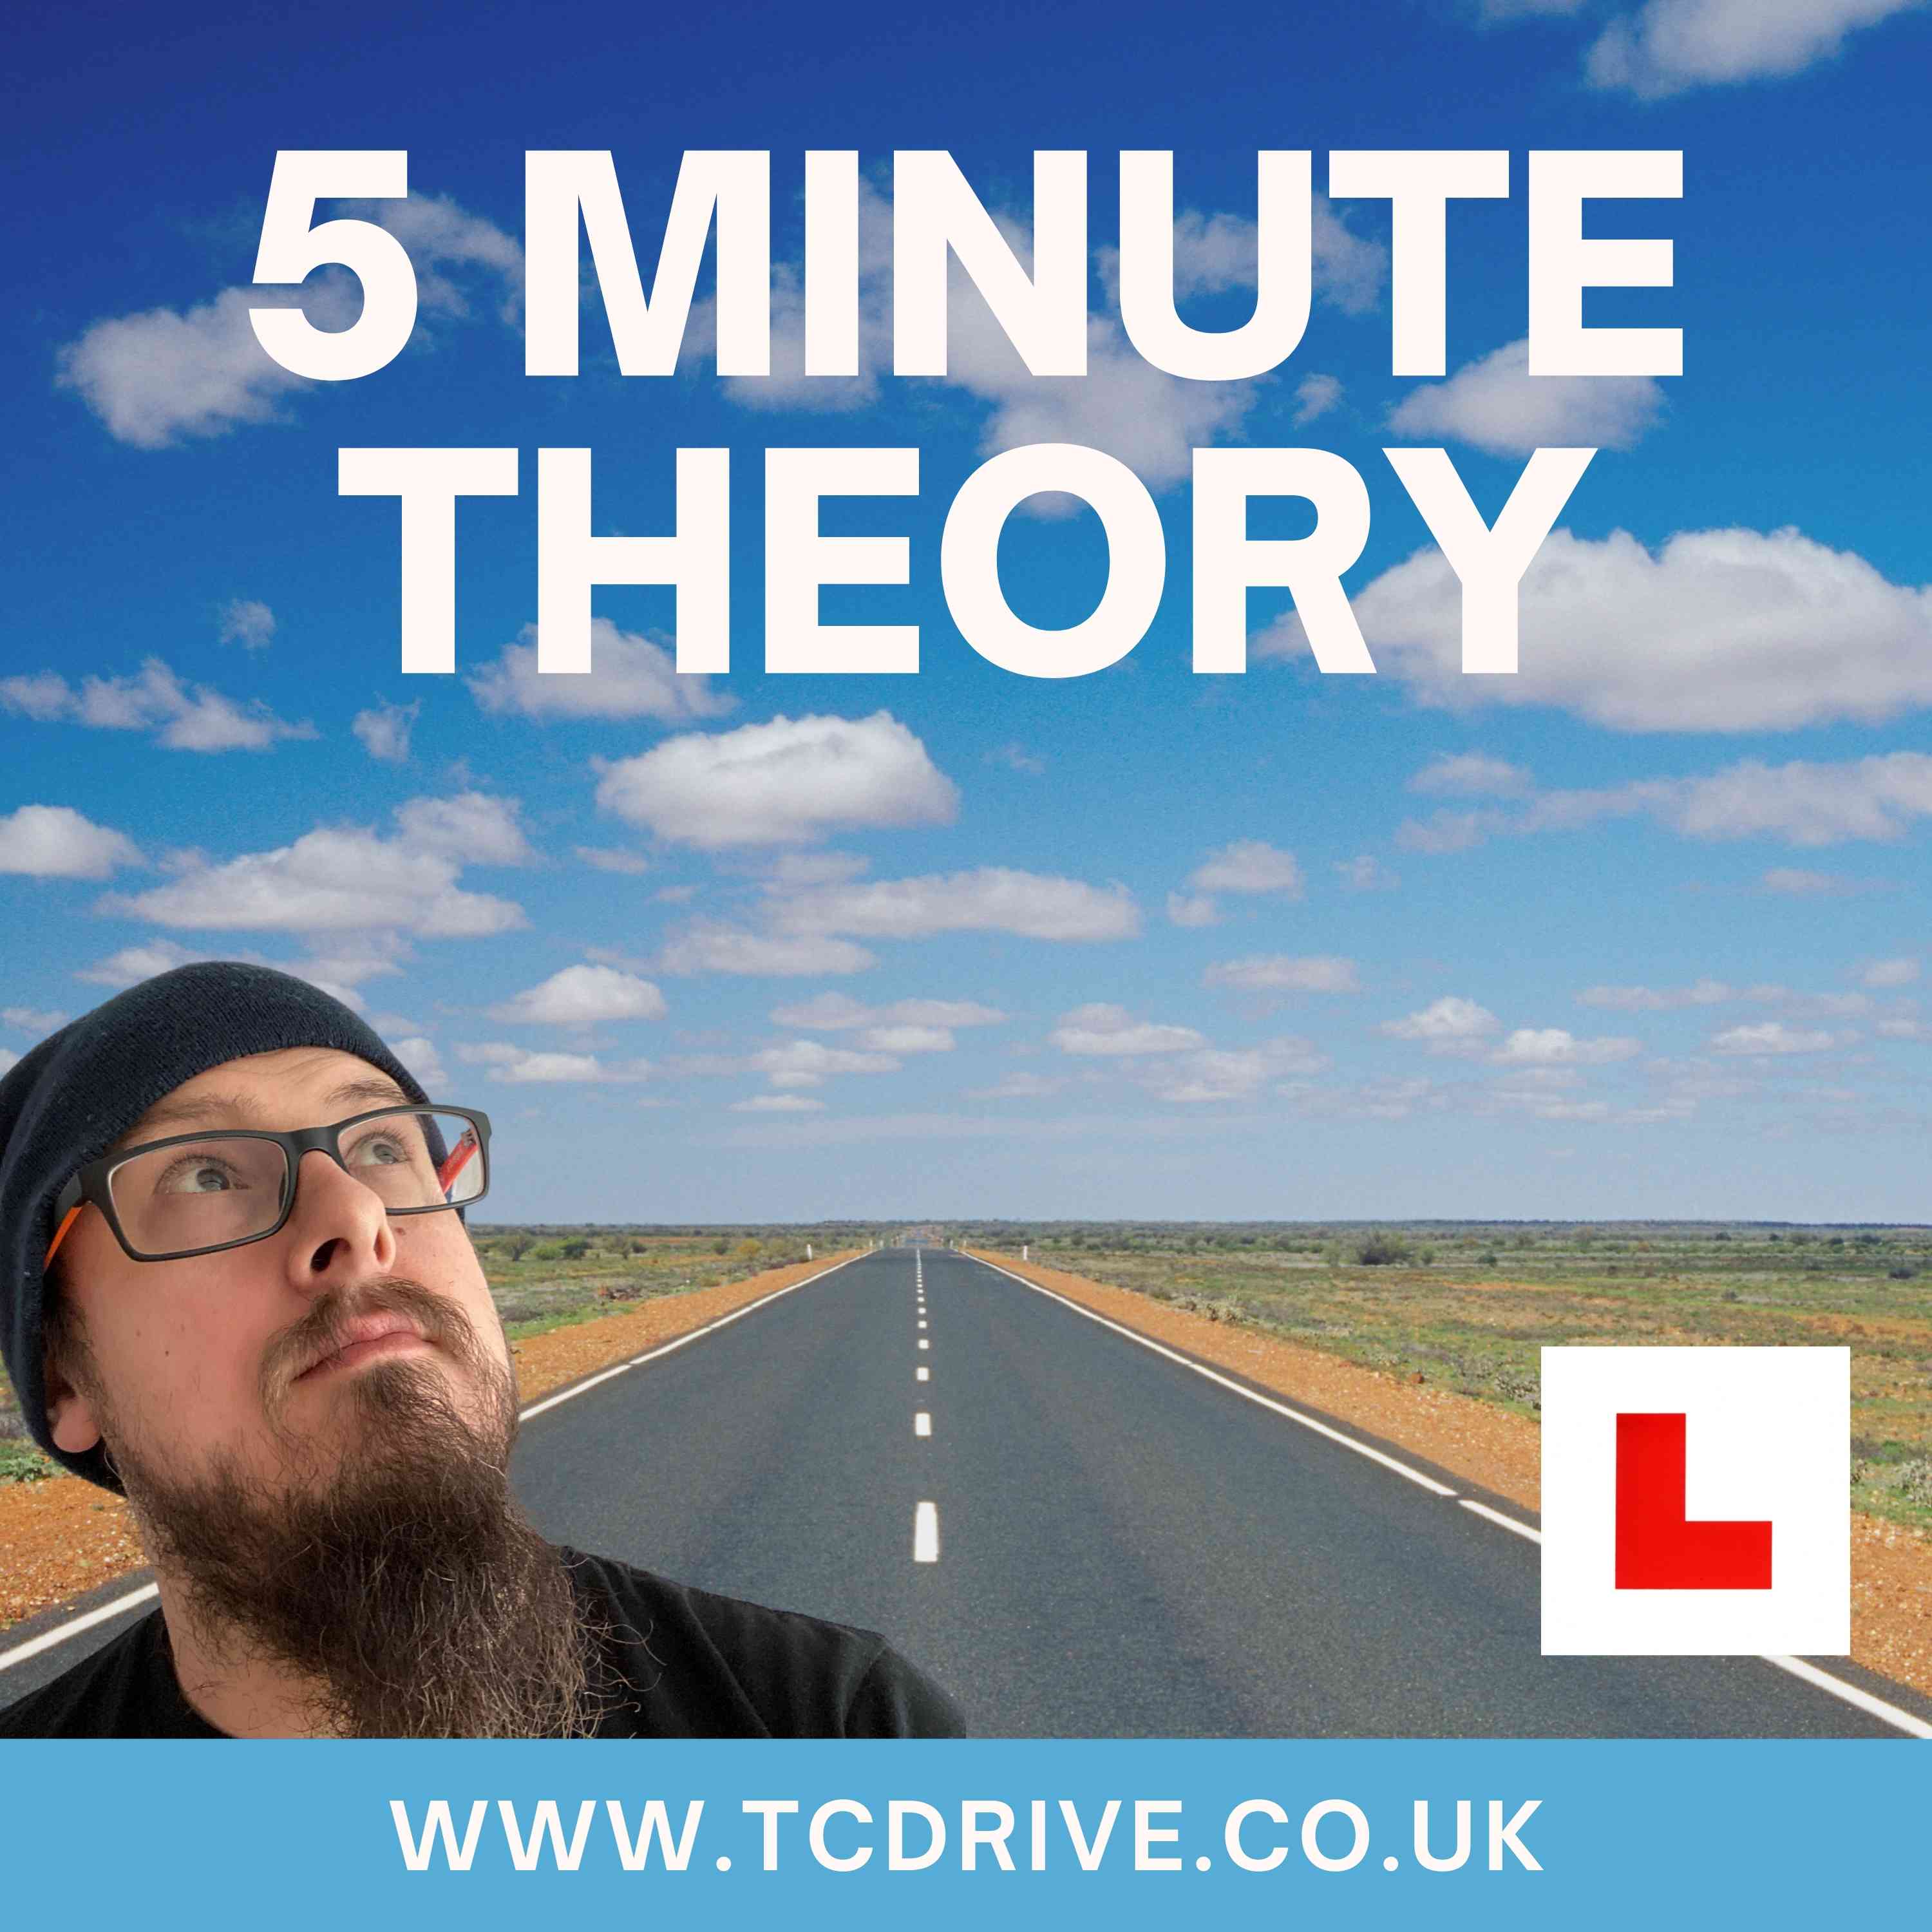 Artwork for 5 minute theory